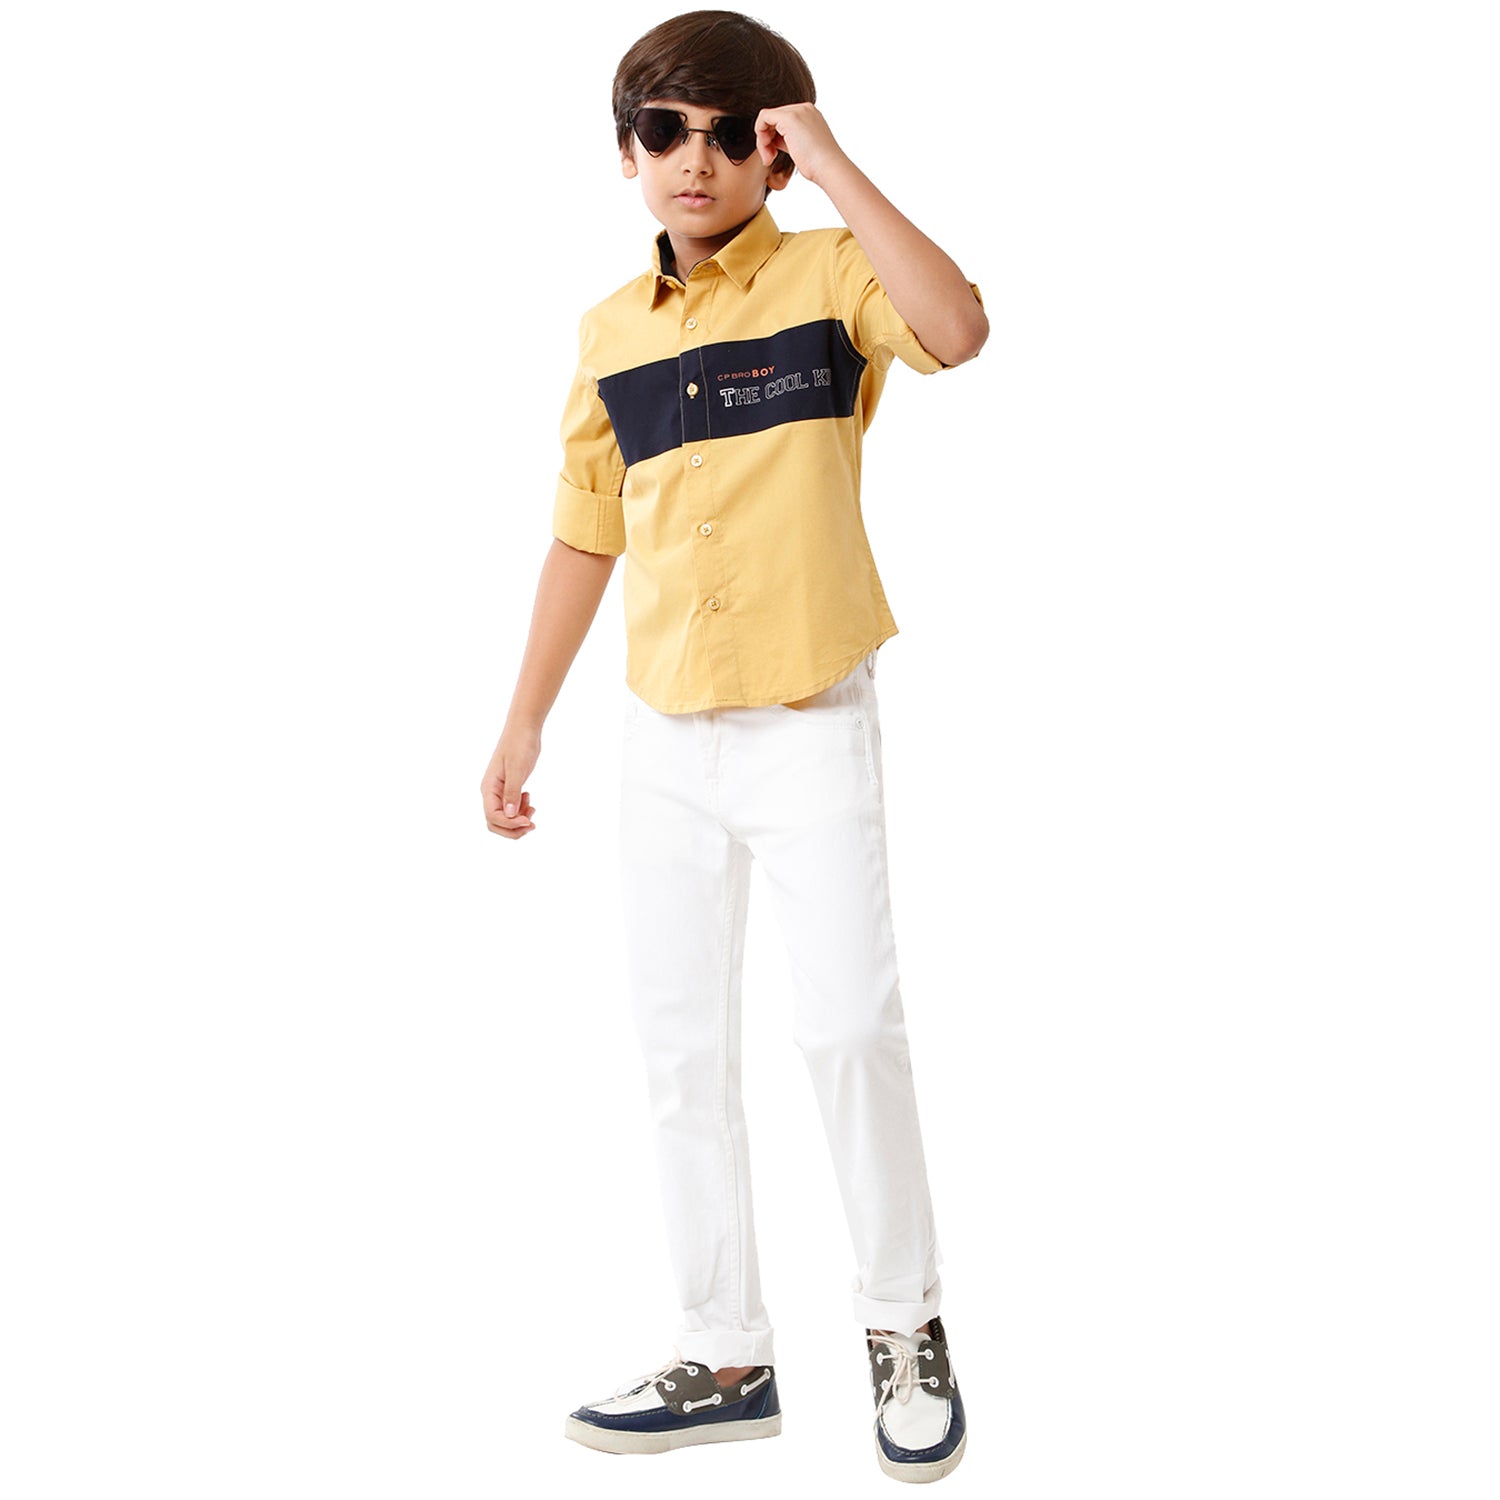 Classic Polo Bro Boys Color Block Full Sleeve Slim Fit Yellow Color Shirt - BBSH S2 39 C Shirts Classic Polo 